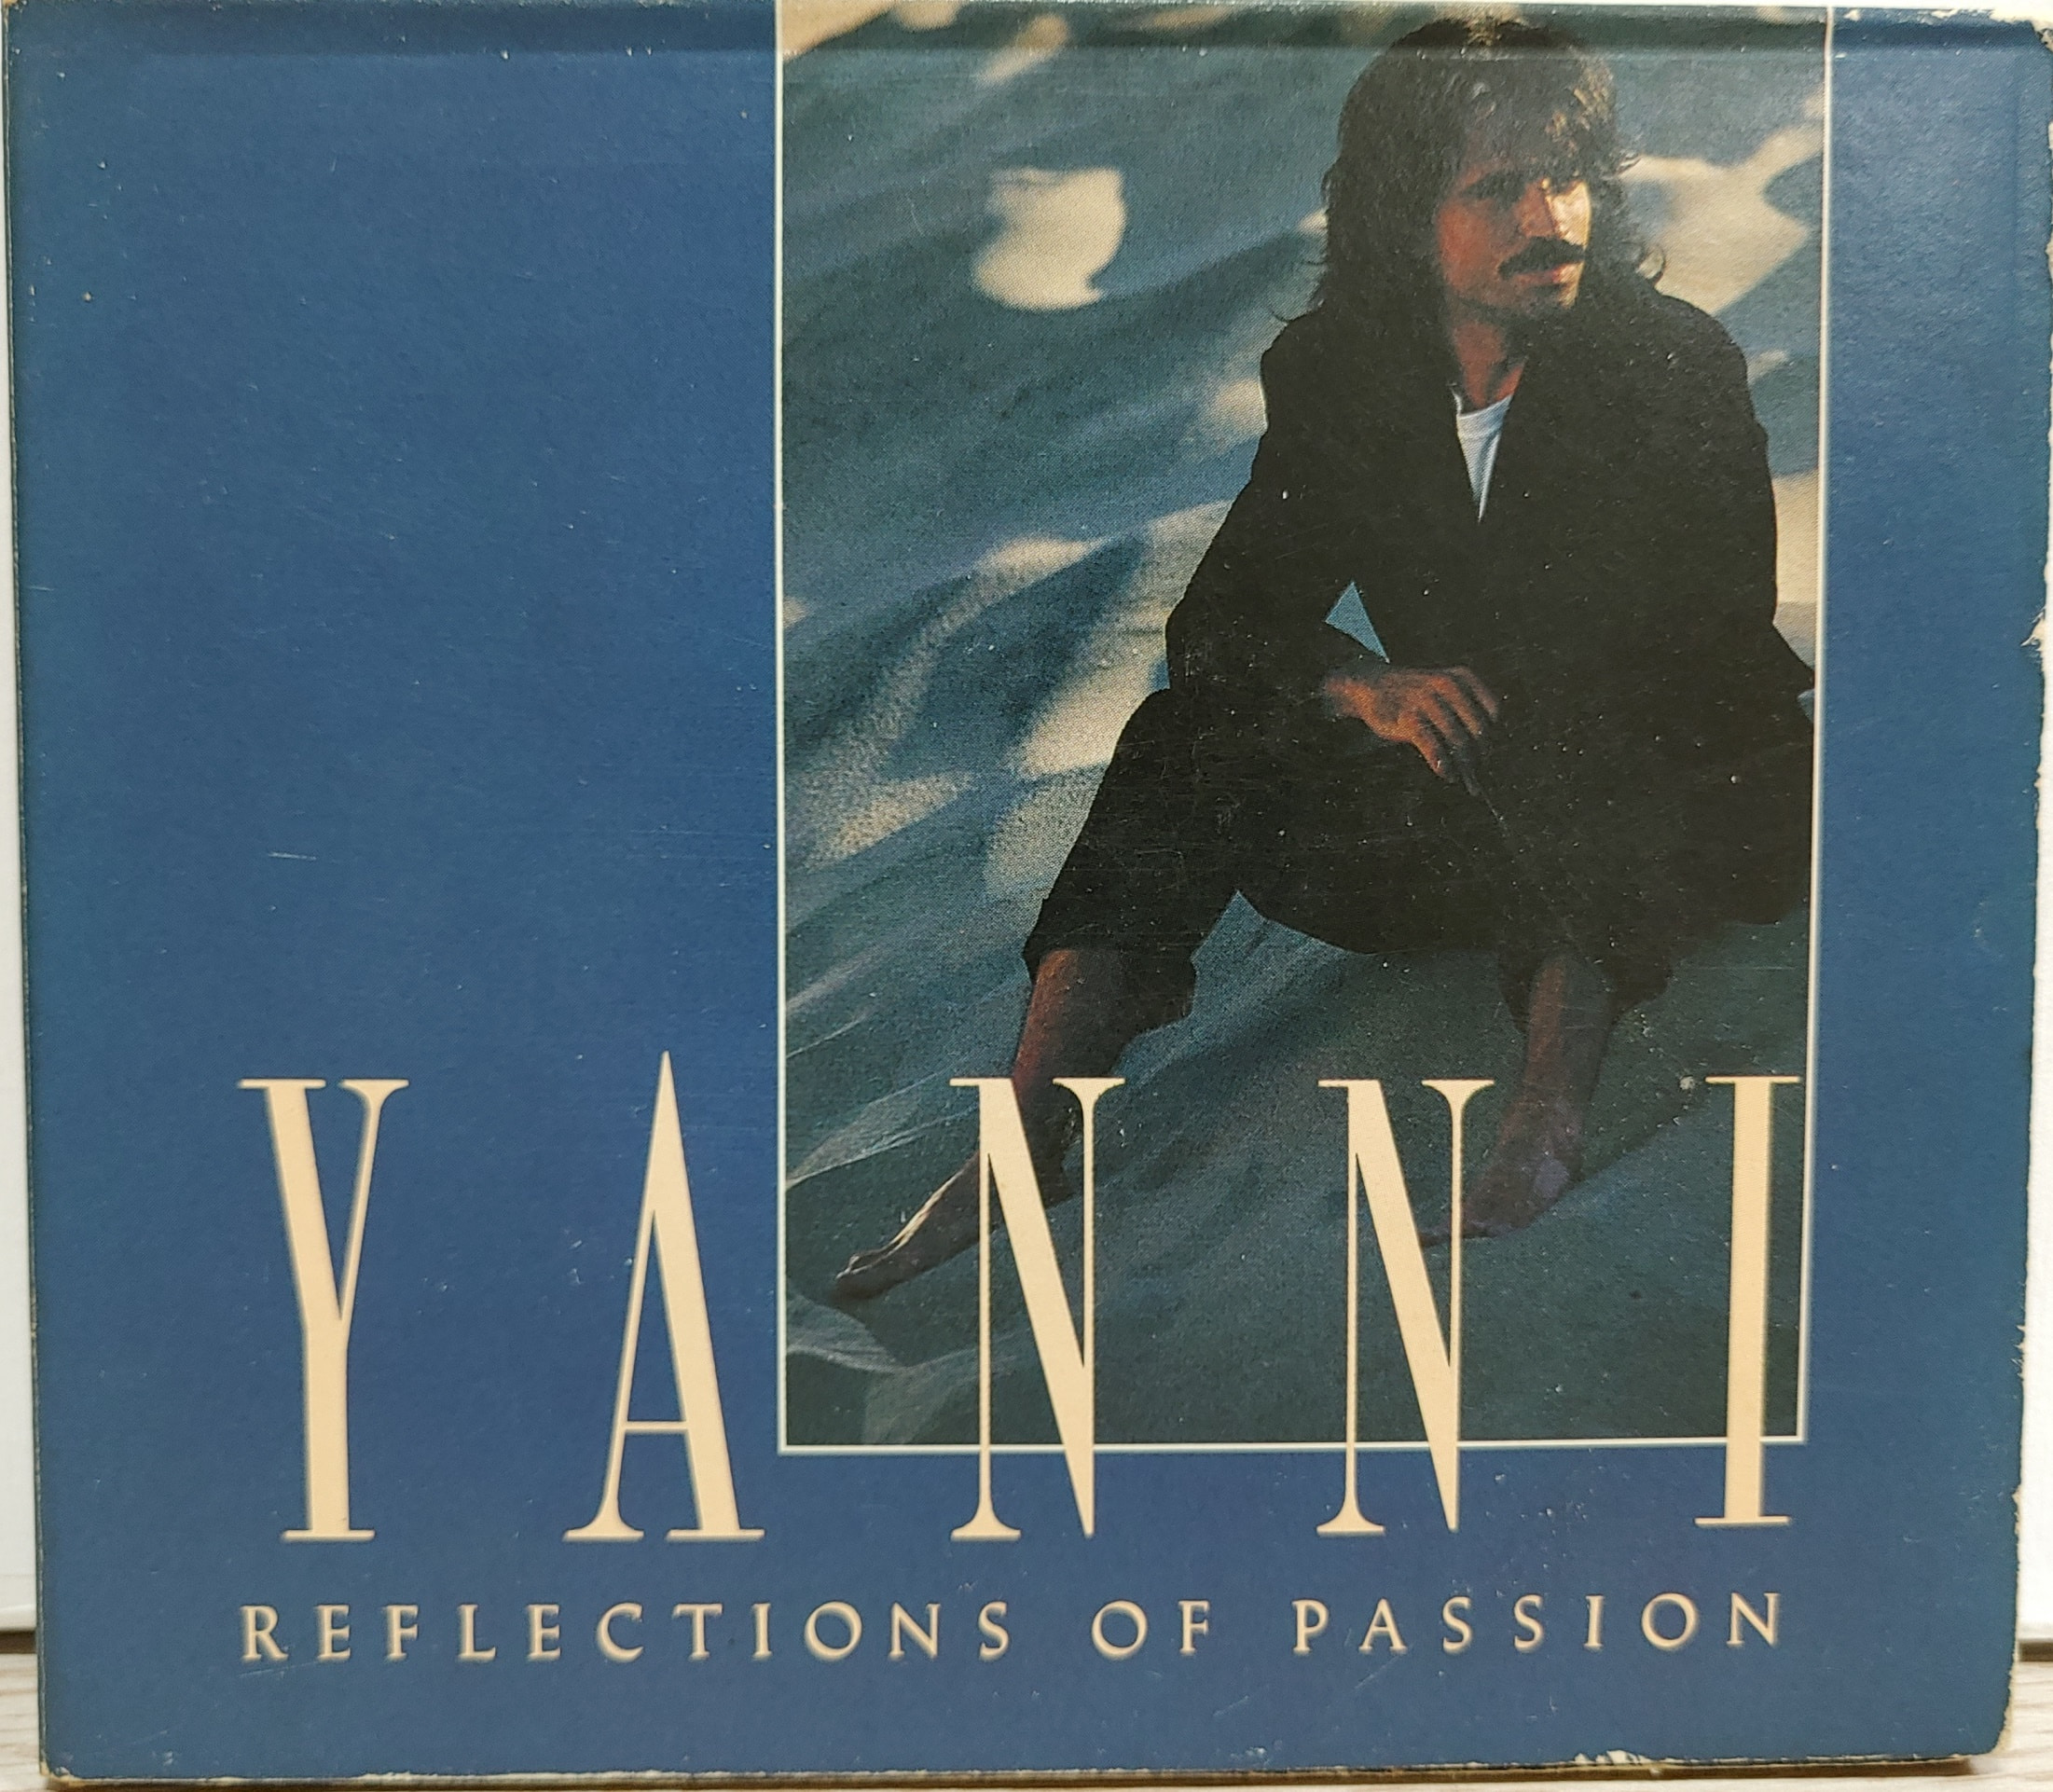 YANNI / REFLECTIONS OF PASSION